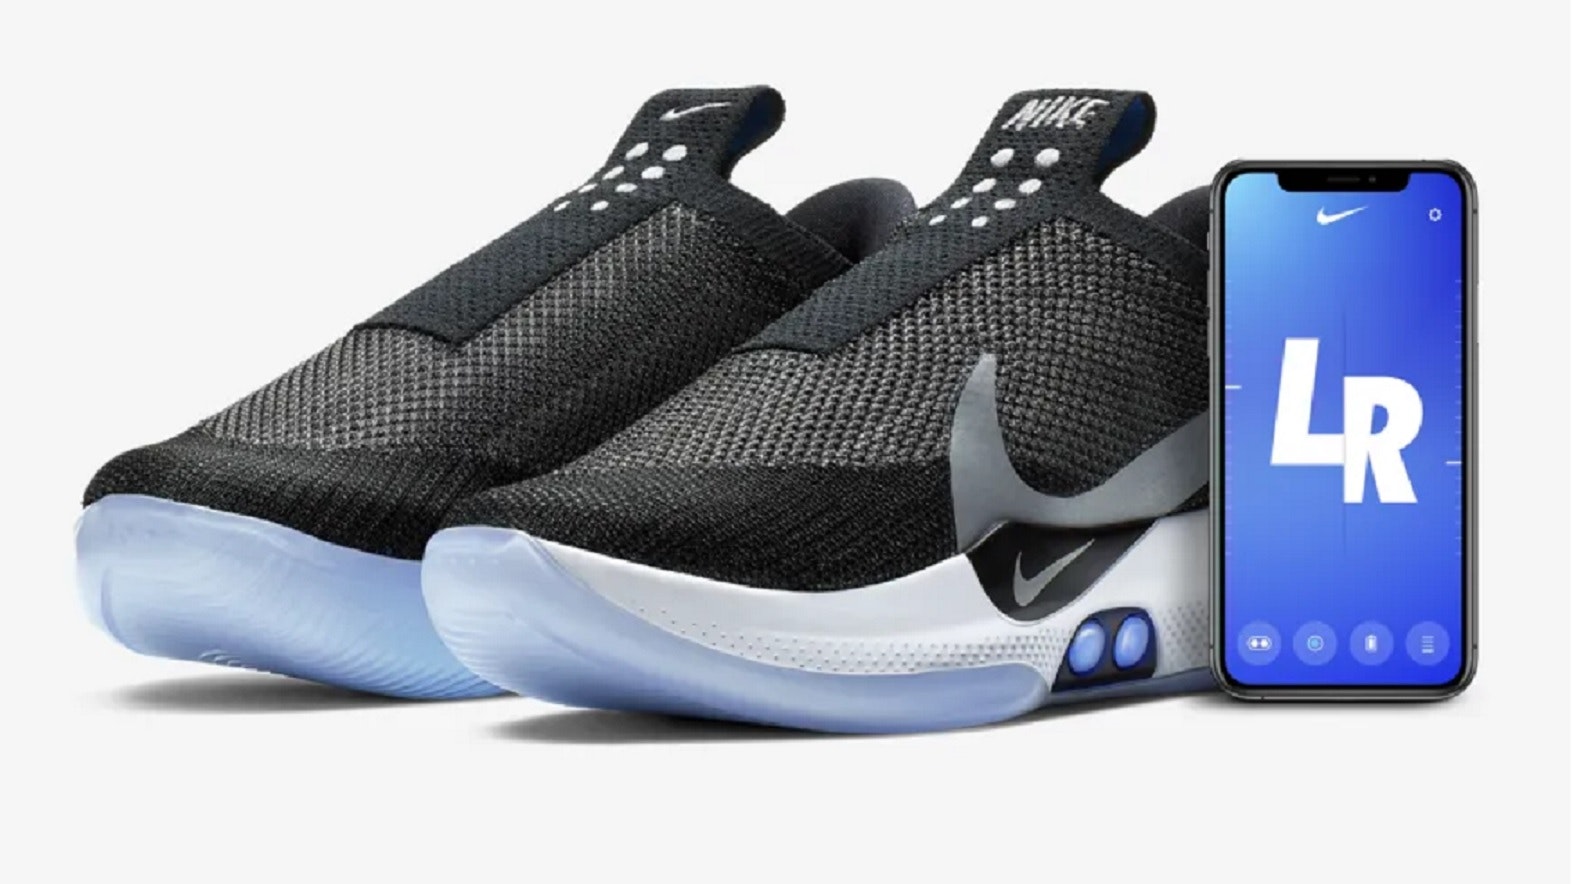 Nike $350 Adapt BB 'connected shoes' with control - Tech Digest